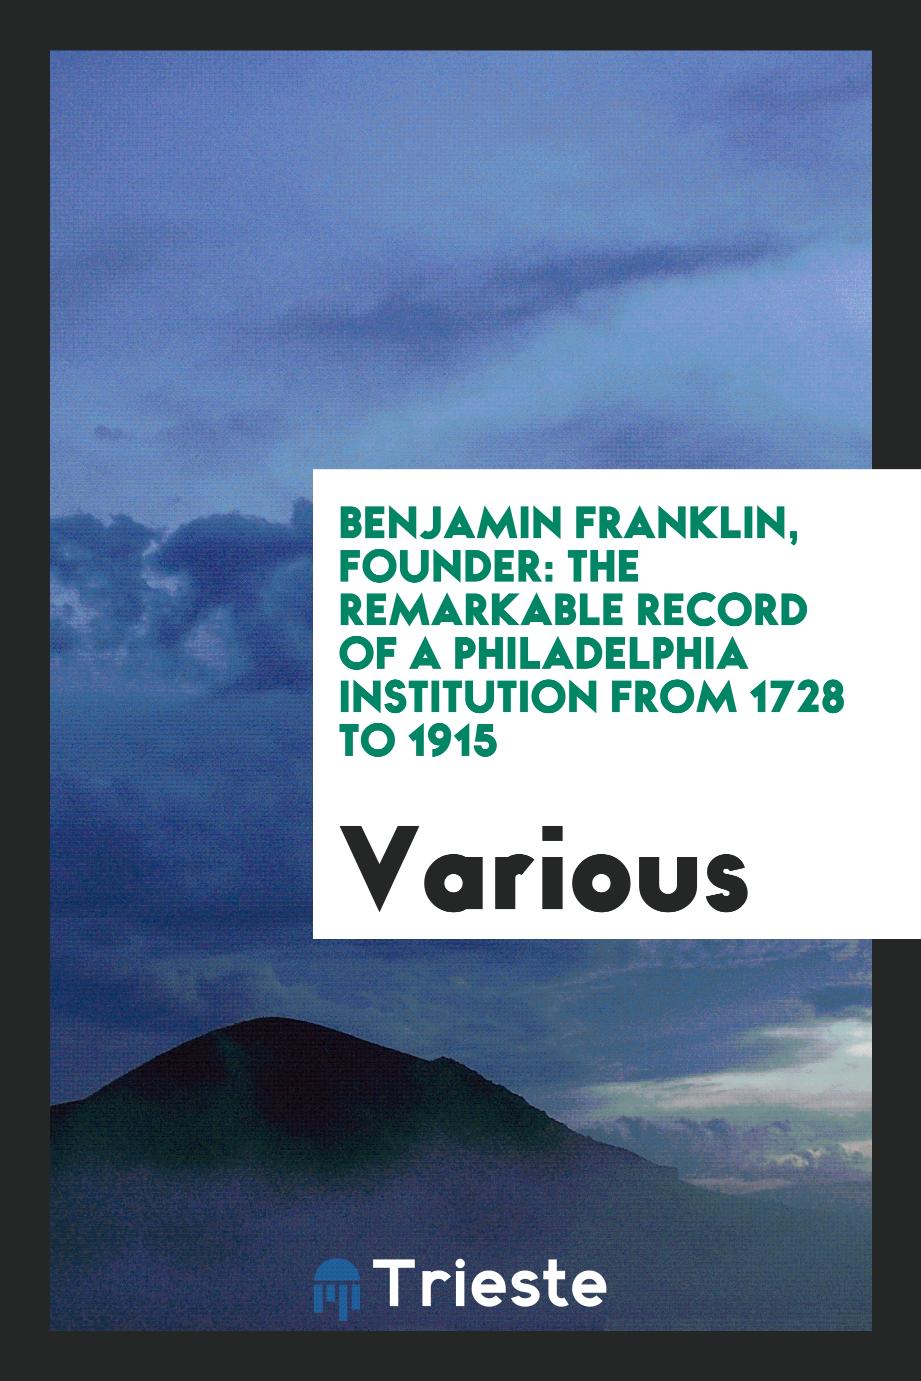 Benjamin Franklin, founder: the remarkable record of a Philadelphia Institution from 1728 to 1915